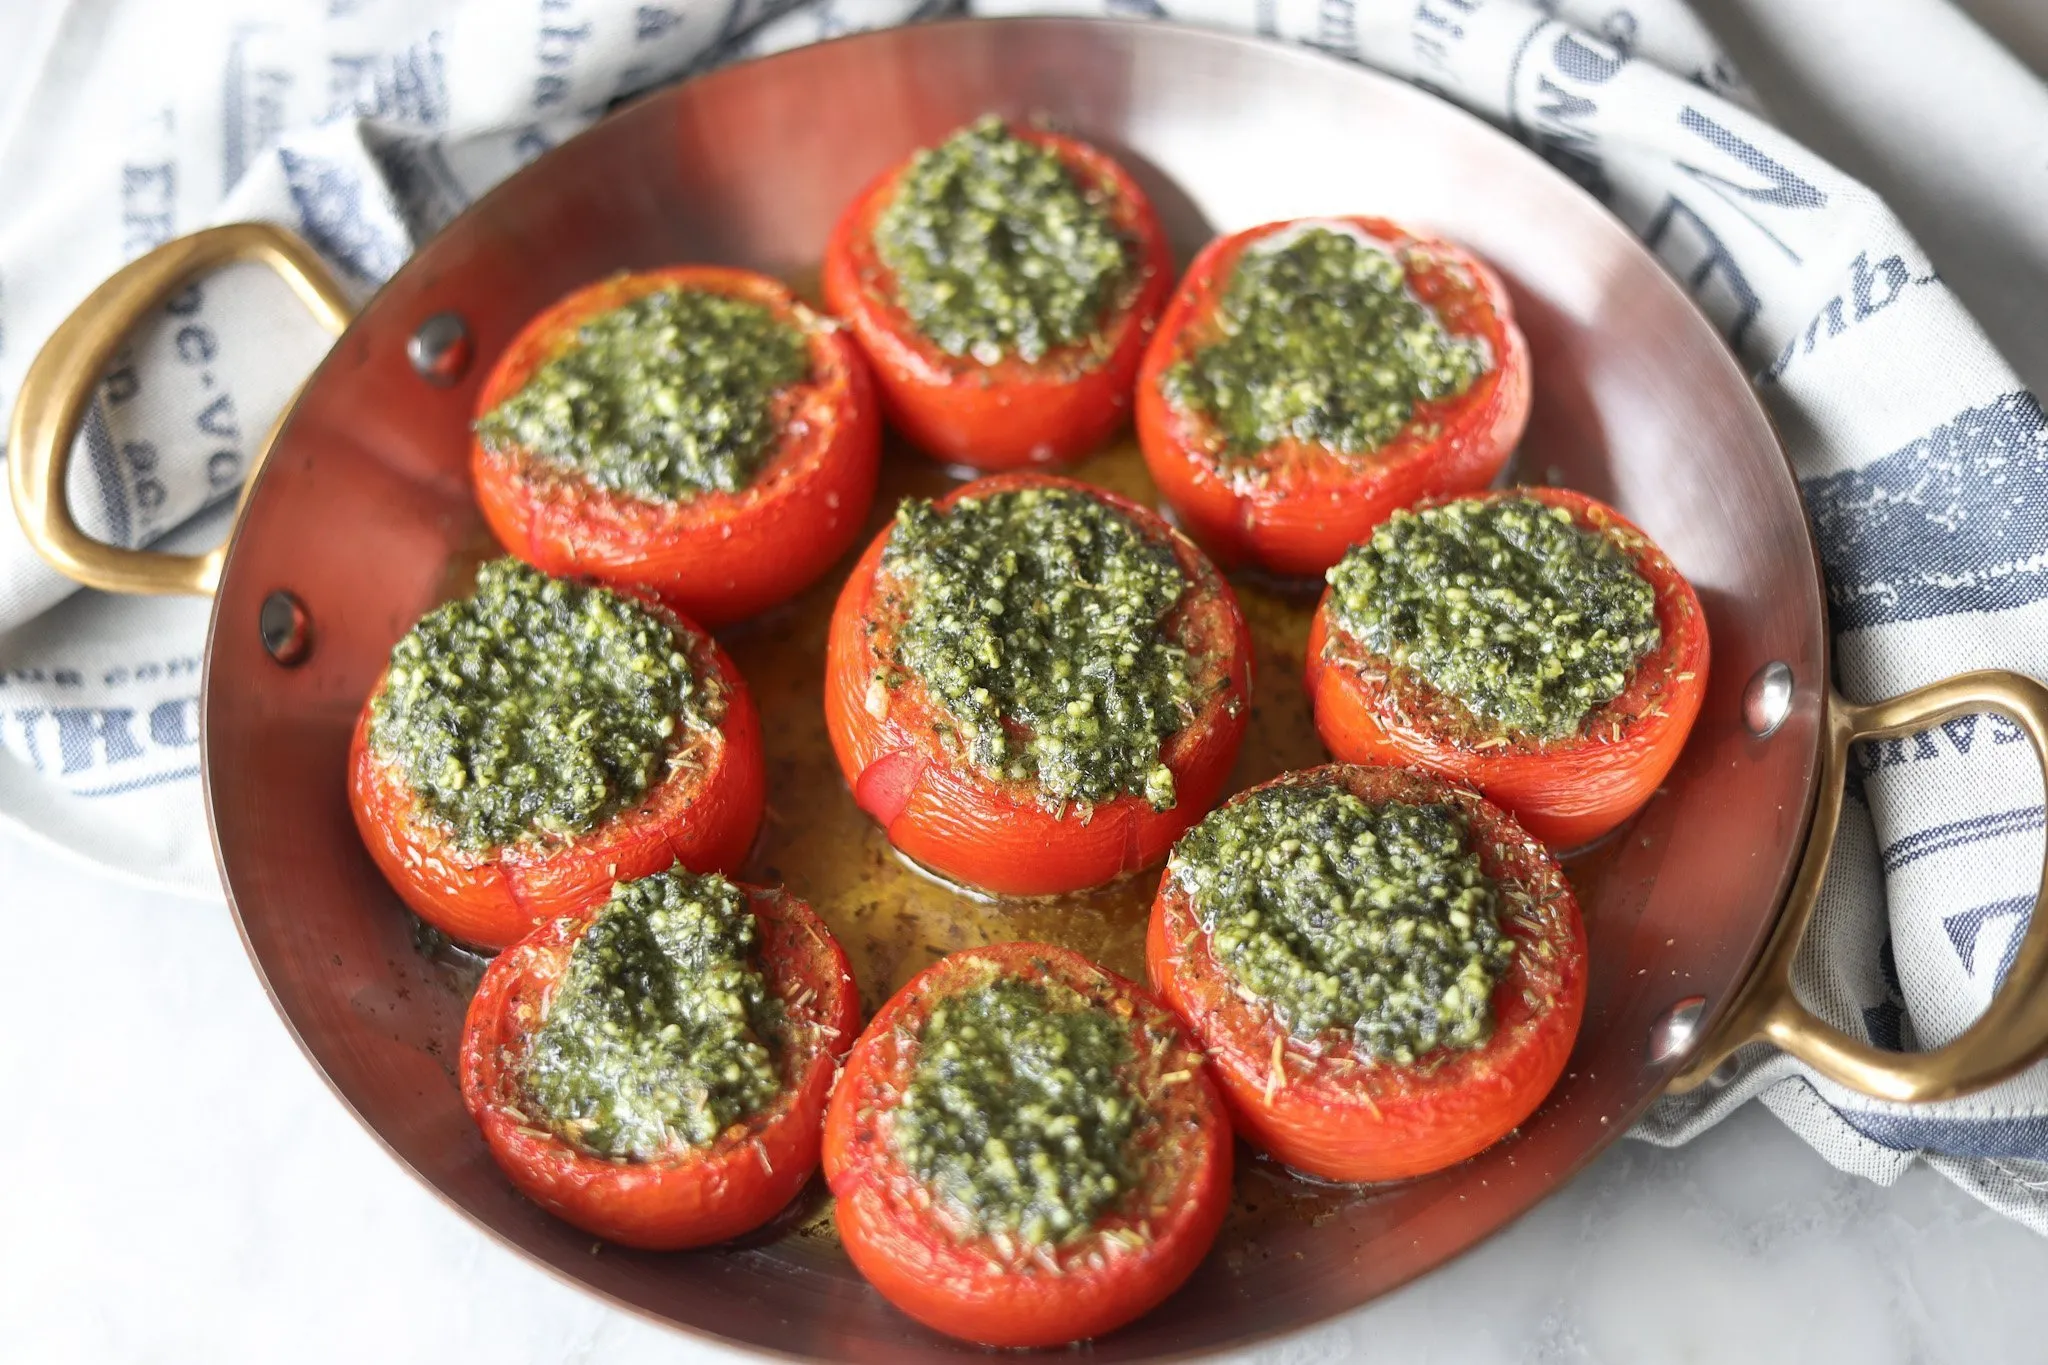 tomatoes Provençale with garlic pesto in a copper baking dish